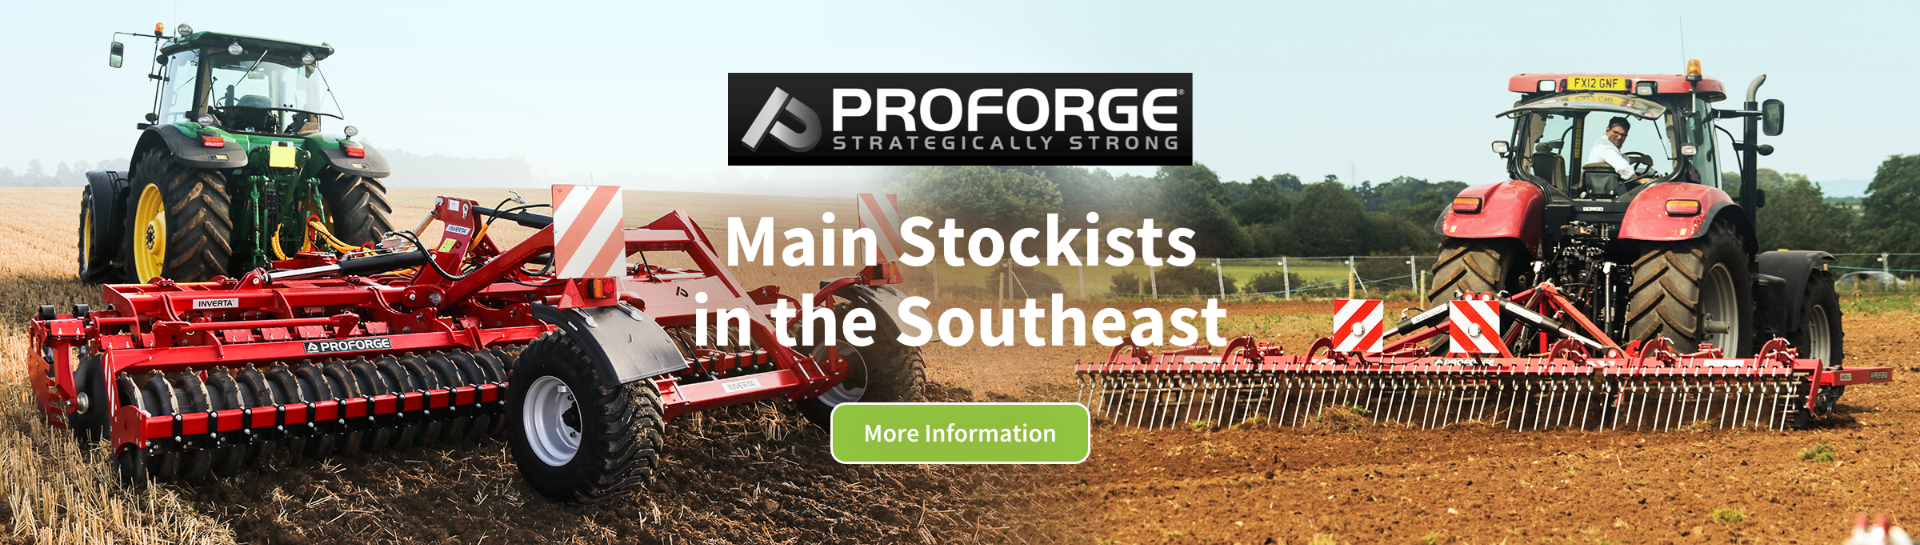 Proforge. Main stockists in the Southeast